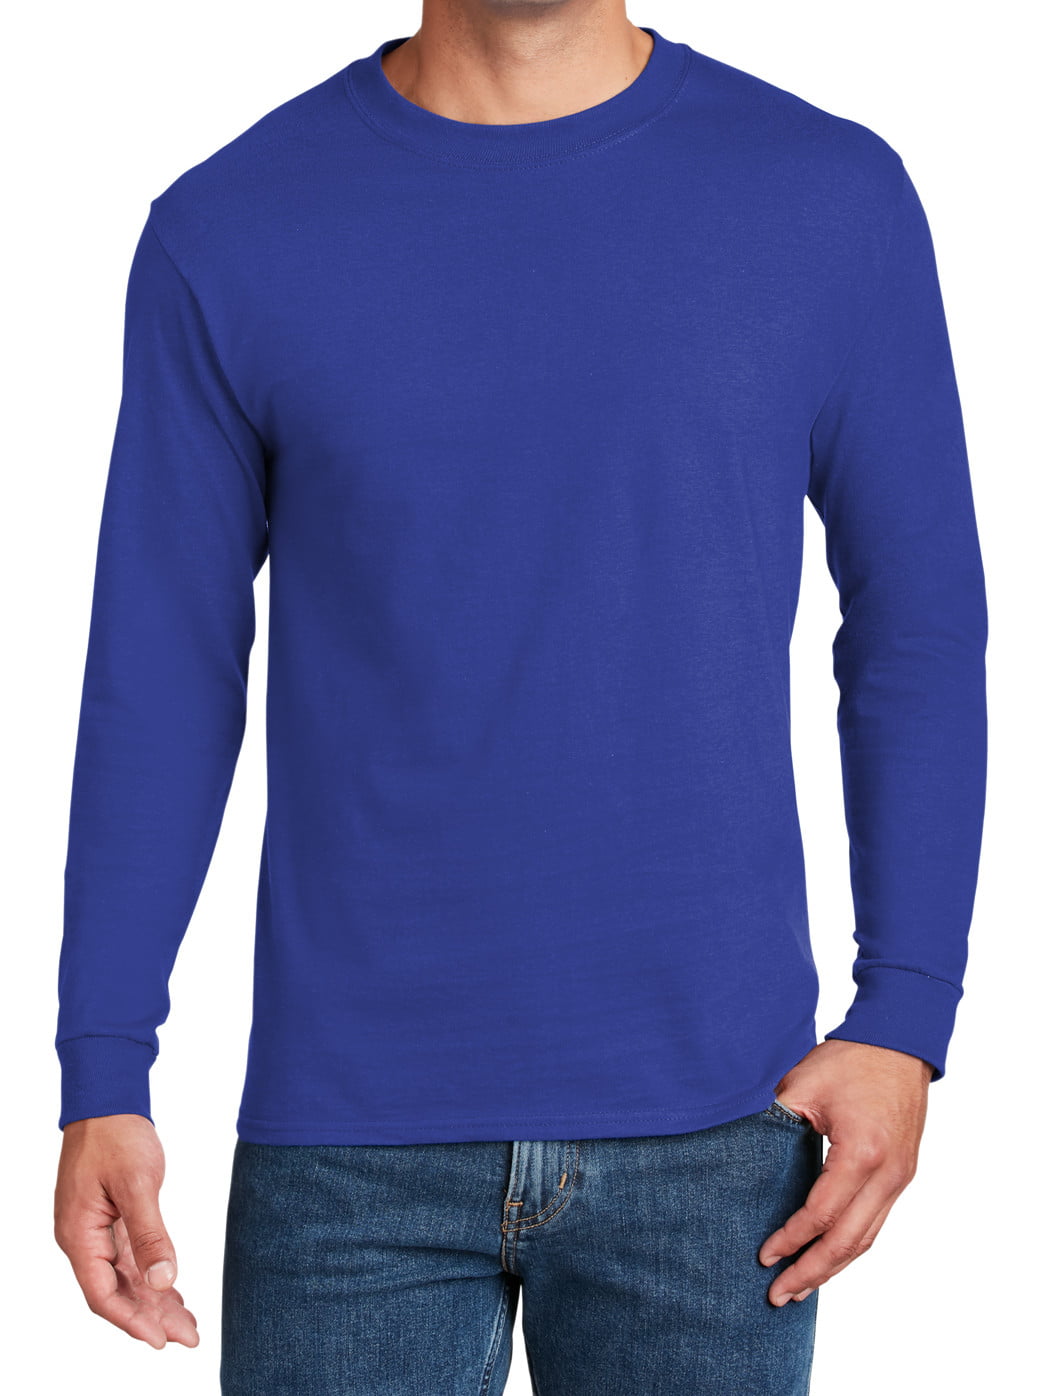 Details about   Hanes Men's Long Sleeve Beefy Henley Shirt 